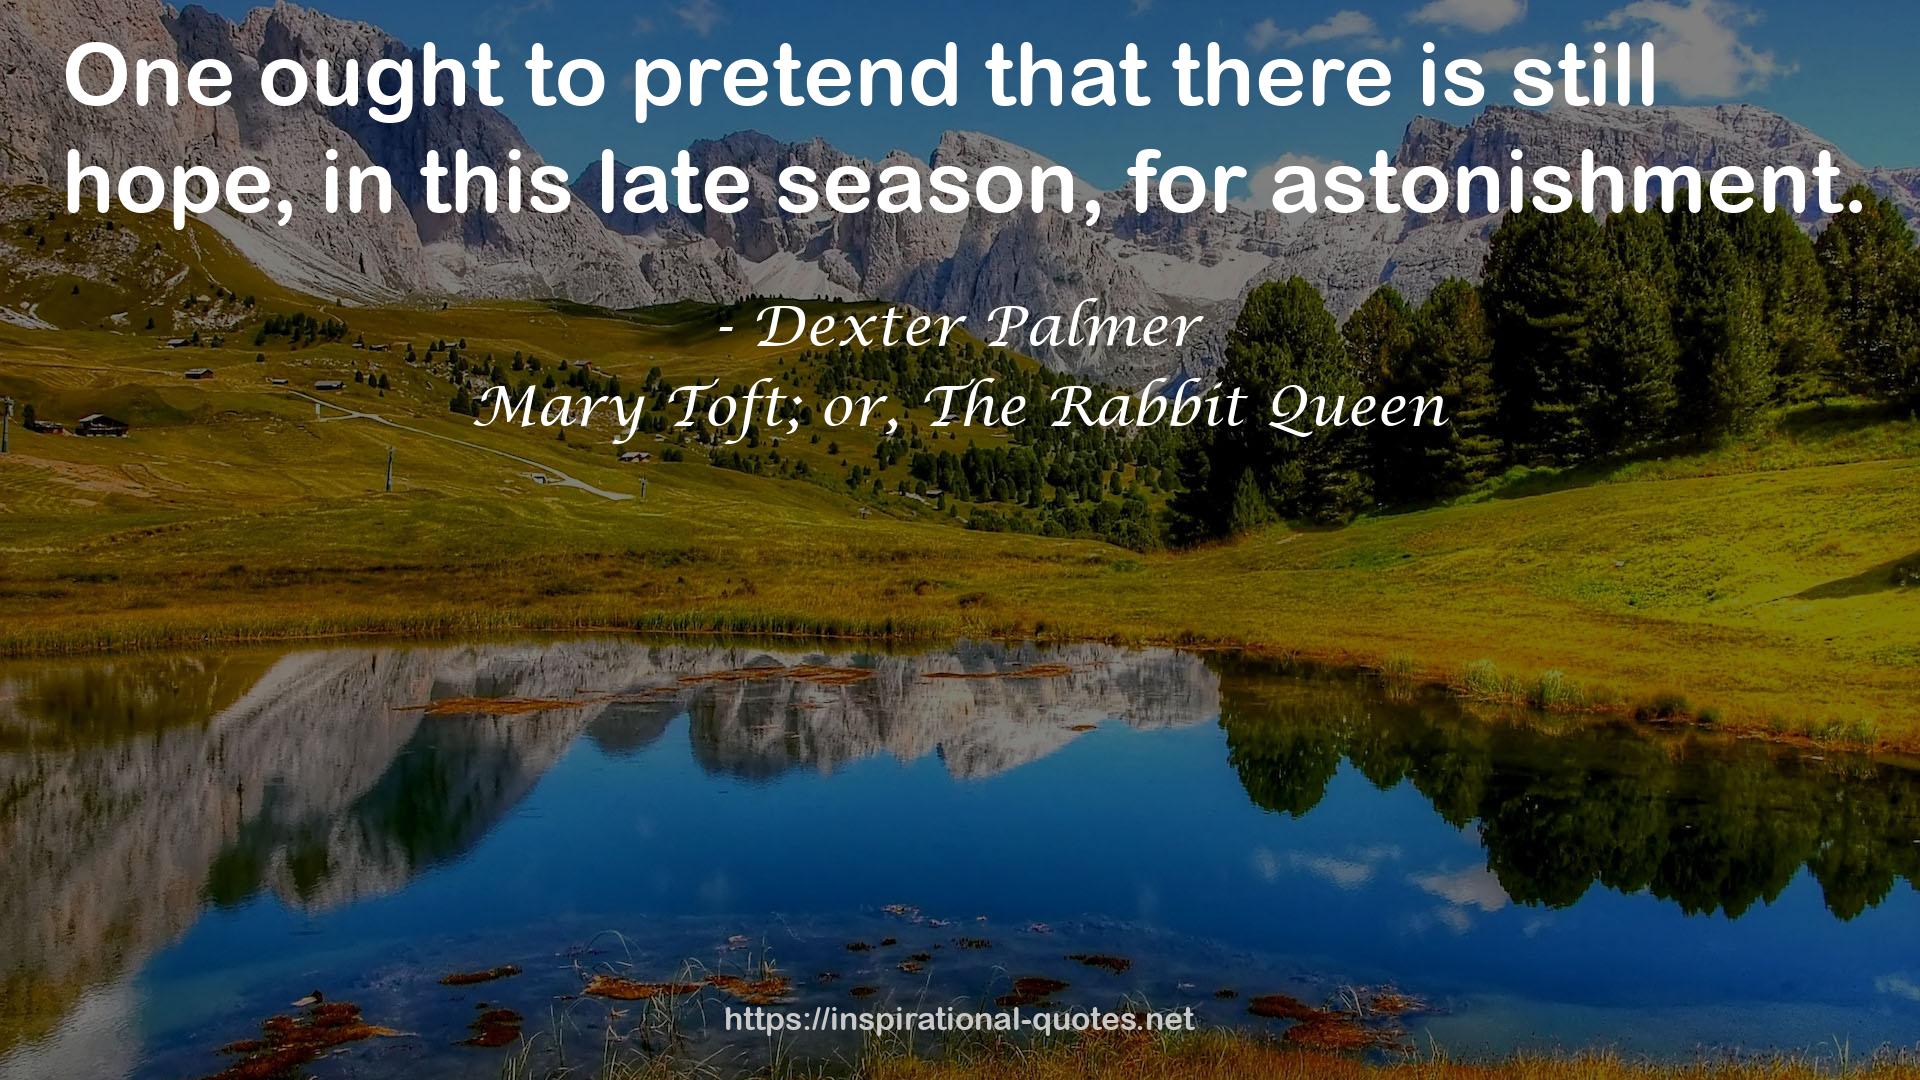 Mary Toft; or, The Rabbit Queen QUOTES